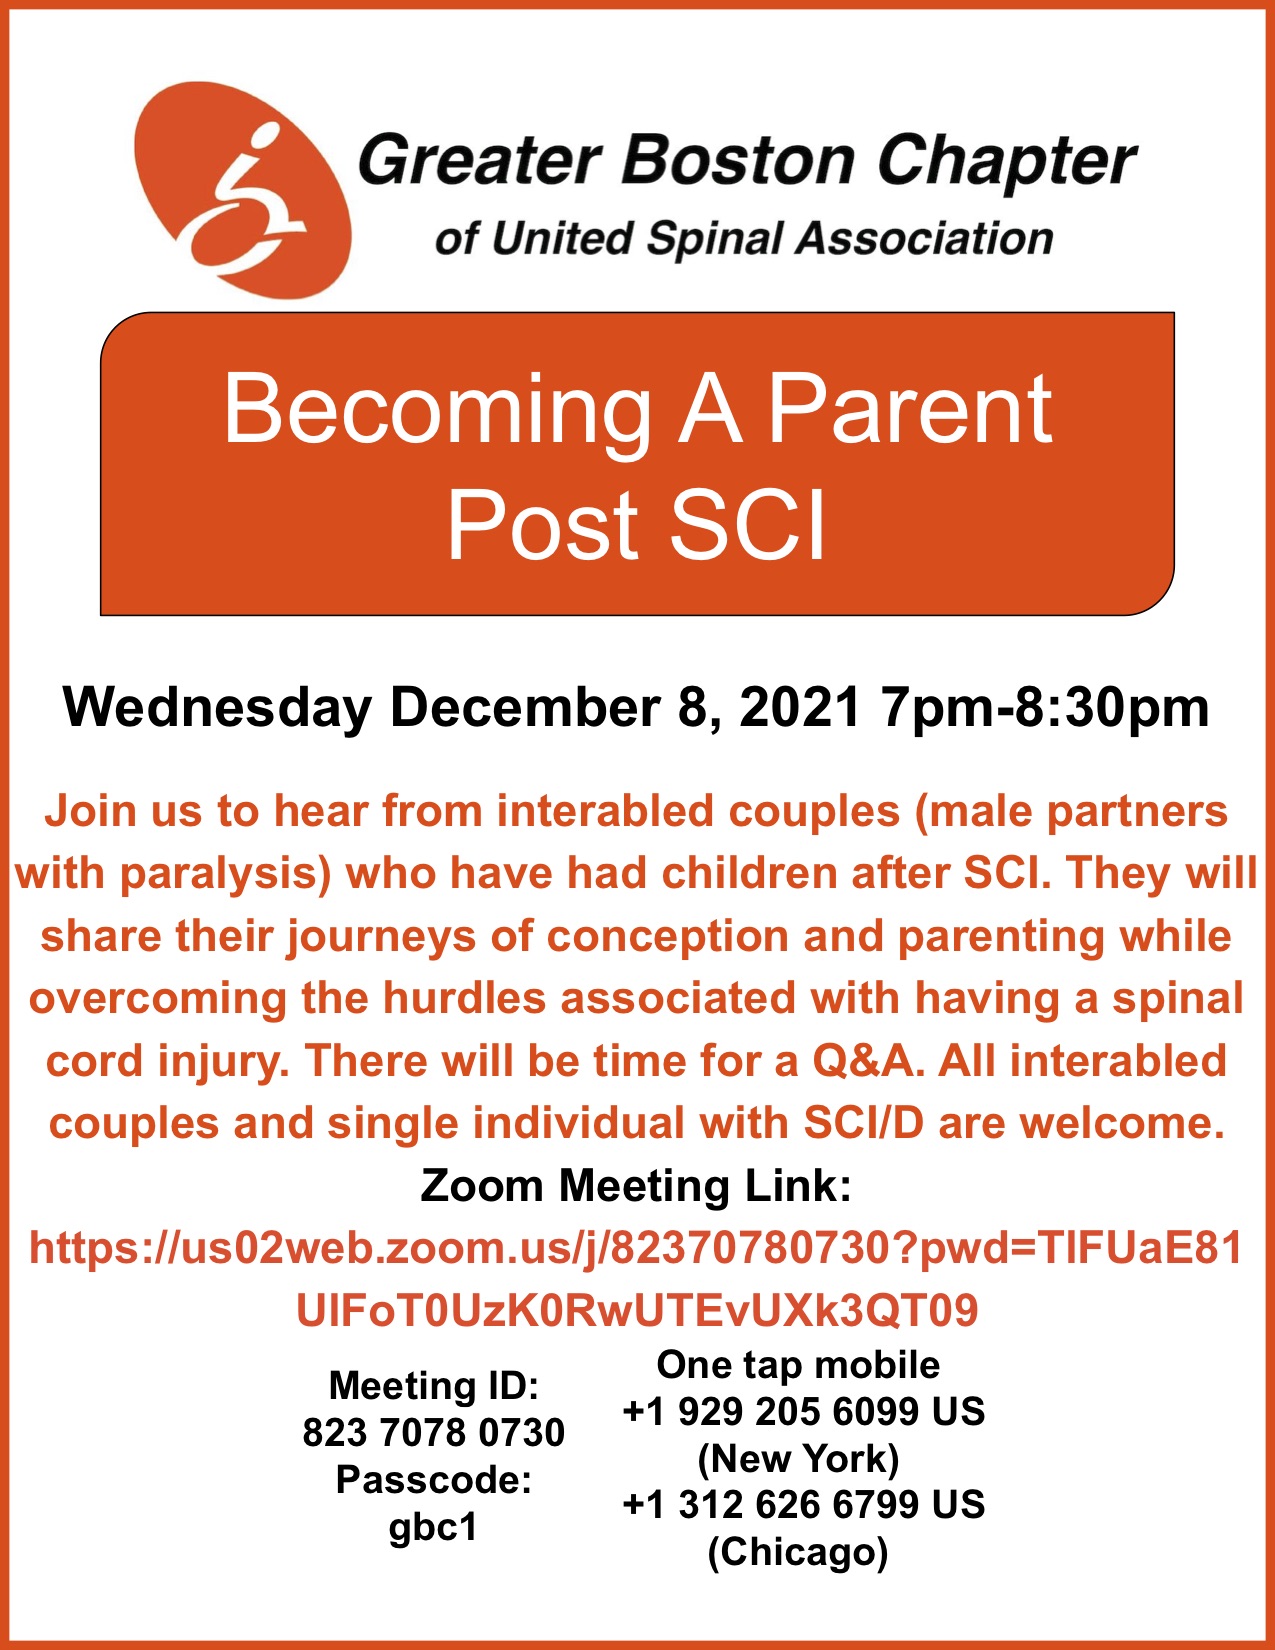 This is a flyer that has the GBC logo at the top. The title: becoming a parent post SCI. The date of Wednesday, December 8, 7 PM-8:30 PM. The description of the meeting: we will have inter-abled couples joining us to tell their journeys about becoming parents after paralysis. There will be a Q&A afterwards. There is a zoom link. If you click on the flyer it will bring you to our event page with a hyper link to join the meeting.